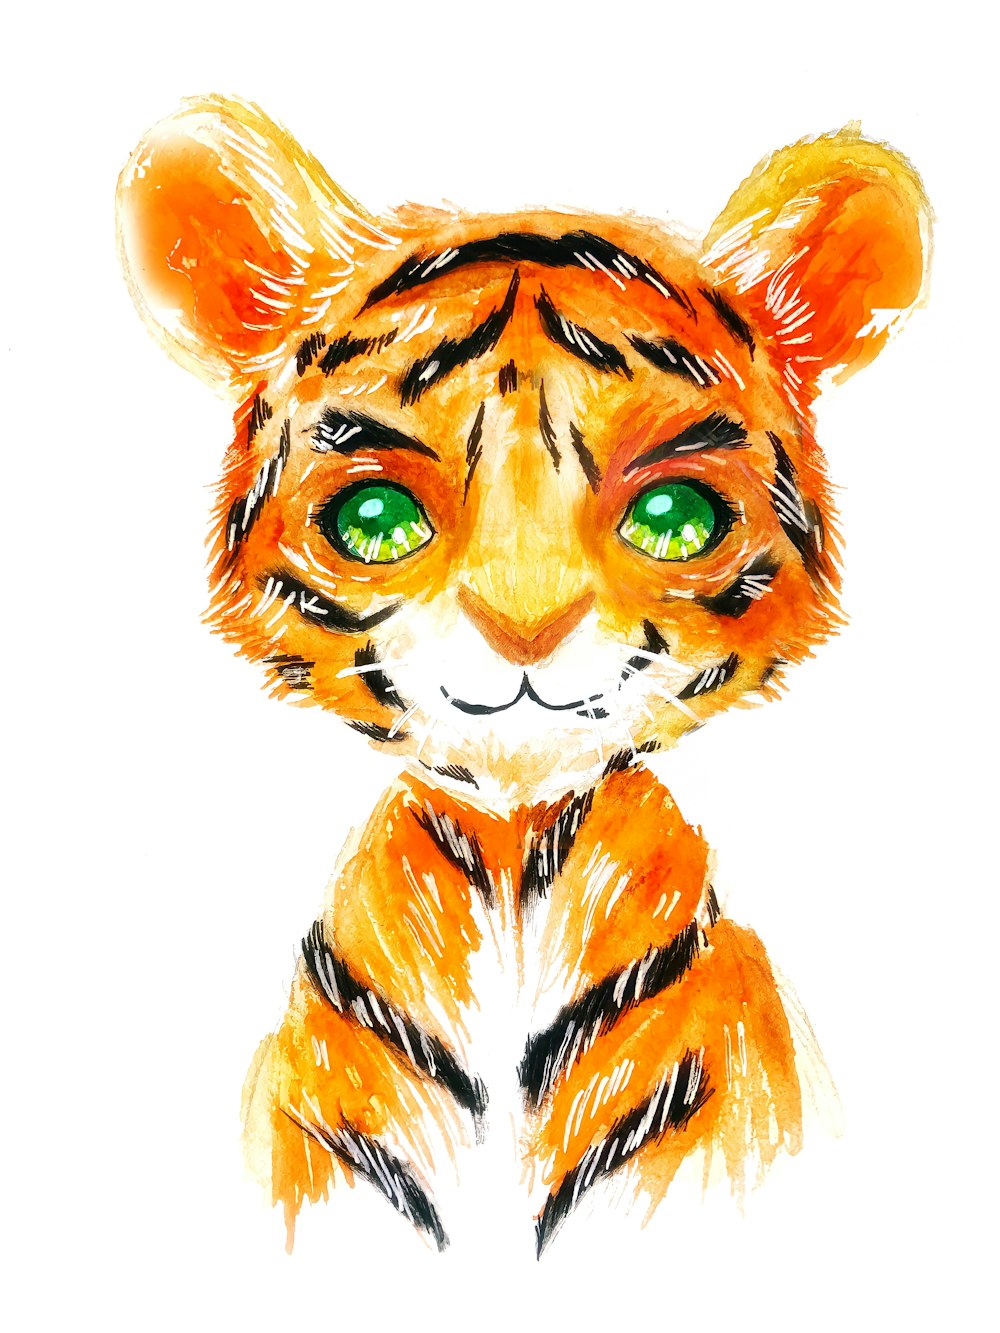 a drawing of a tiger with green eyes